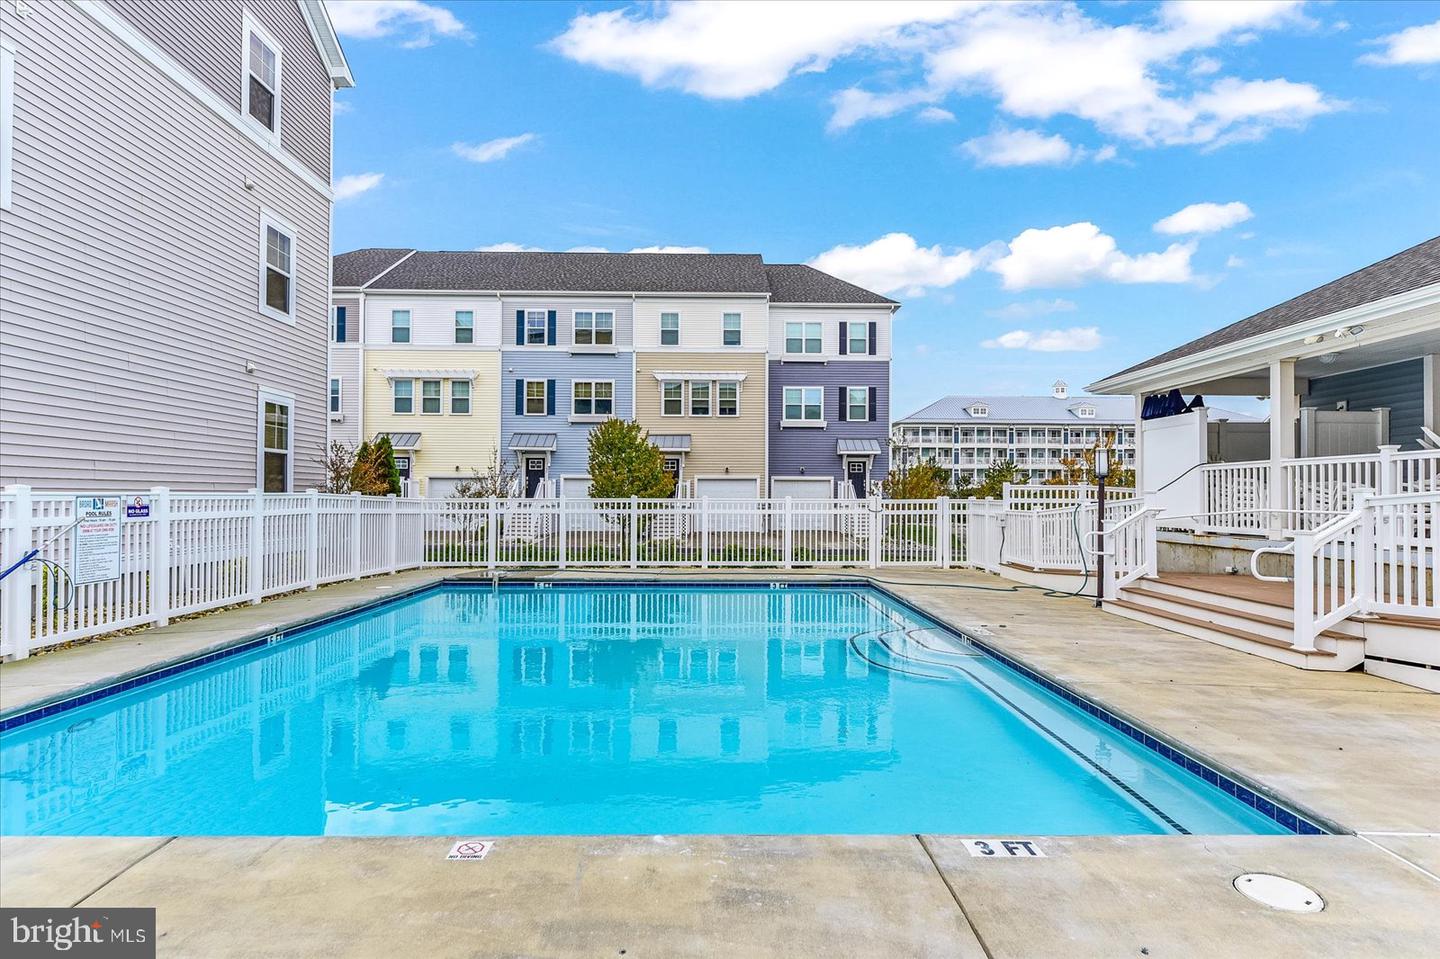 MDWO2020110-802983928774-2024-04-10-17-55-25 112 69th St #a | Ocean City, MD Real Estate For Sale | MLS# Mdwo2020110  - 1st Choice Properties